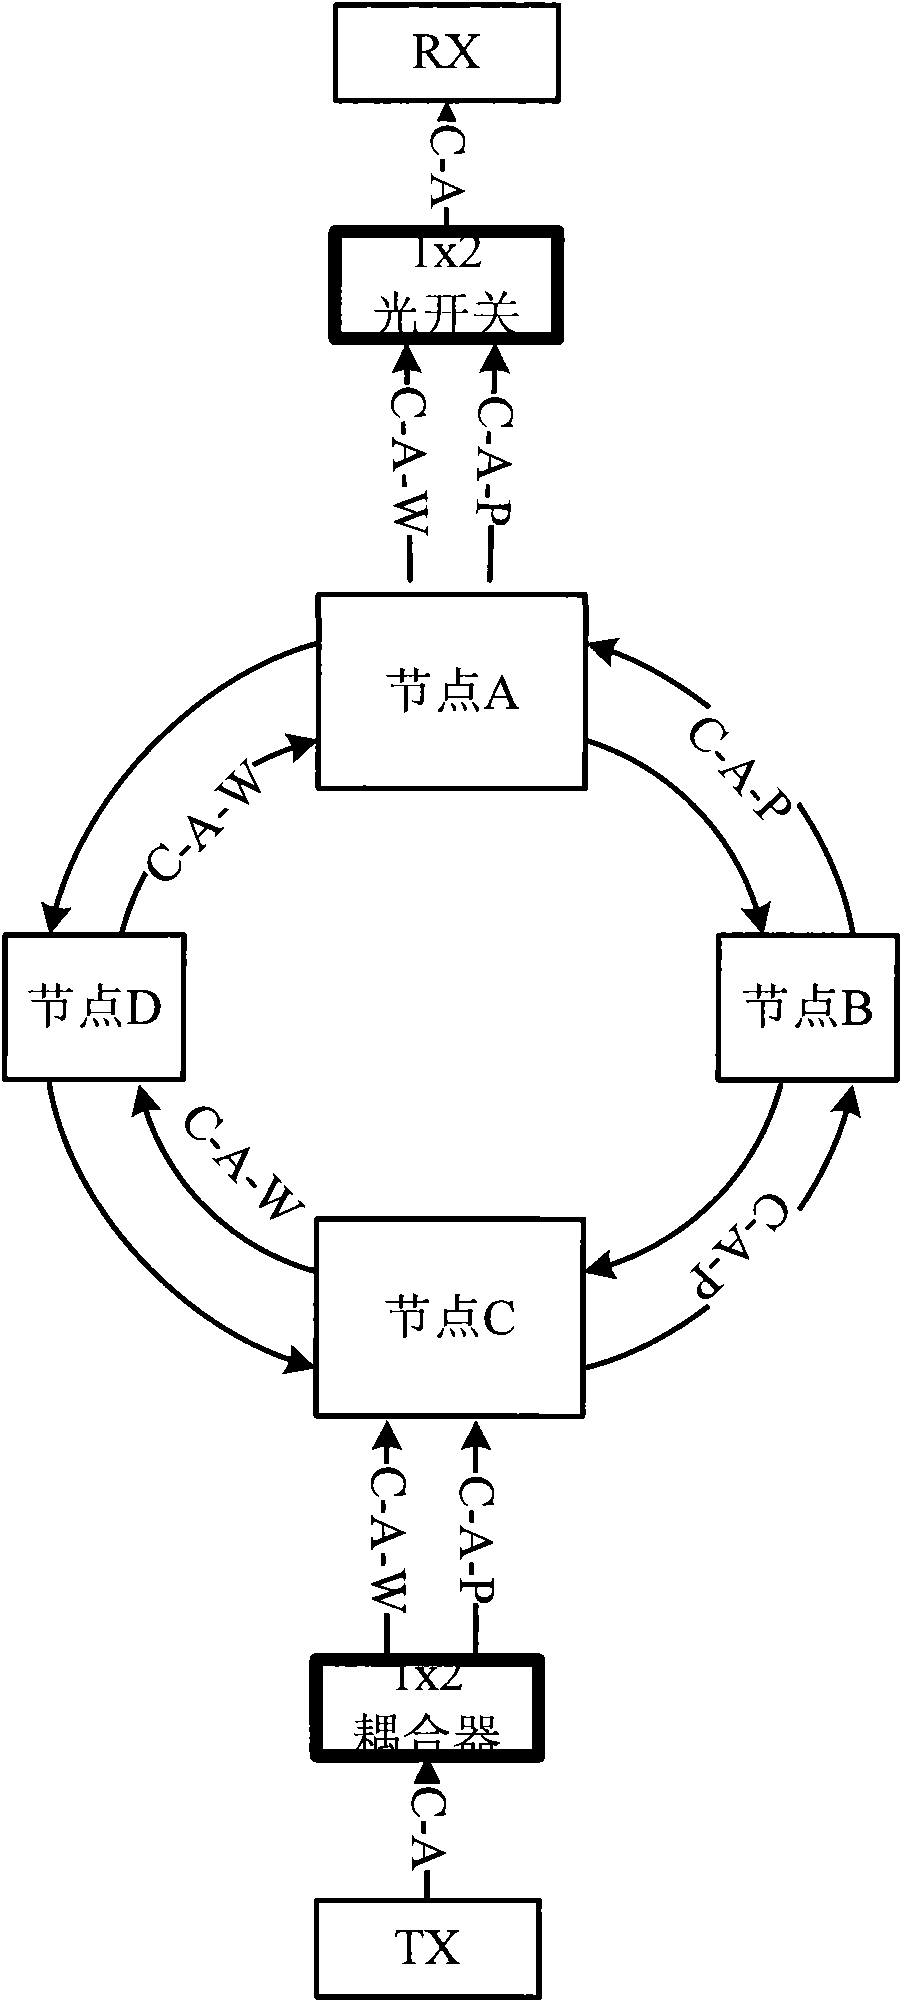 Optical layer protection method for ROADM in multi-node ROADM ring network